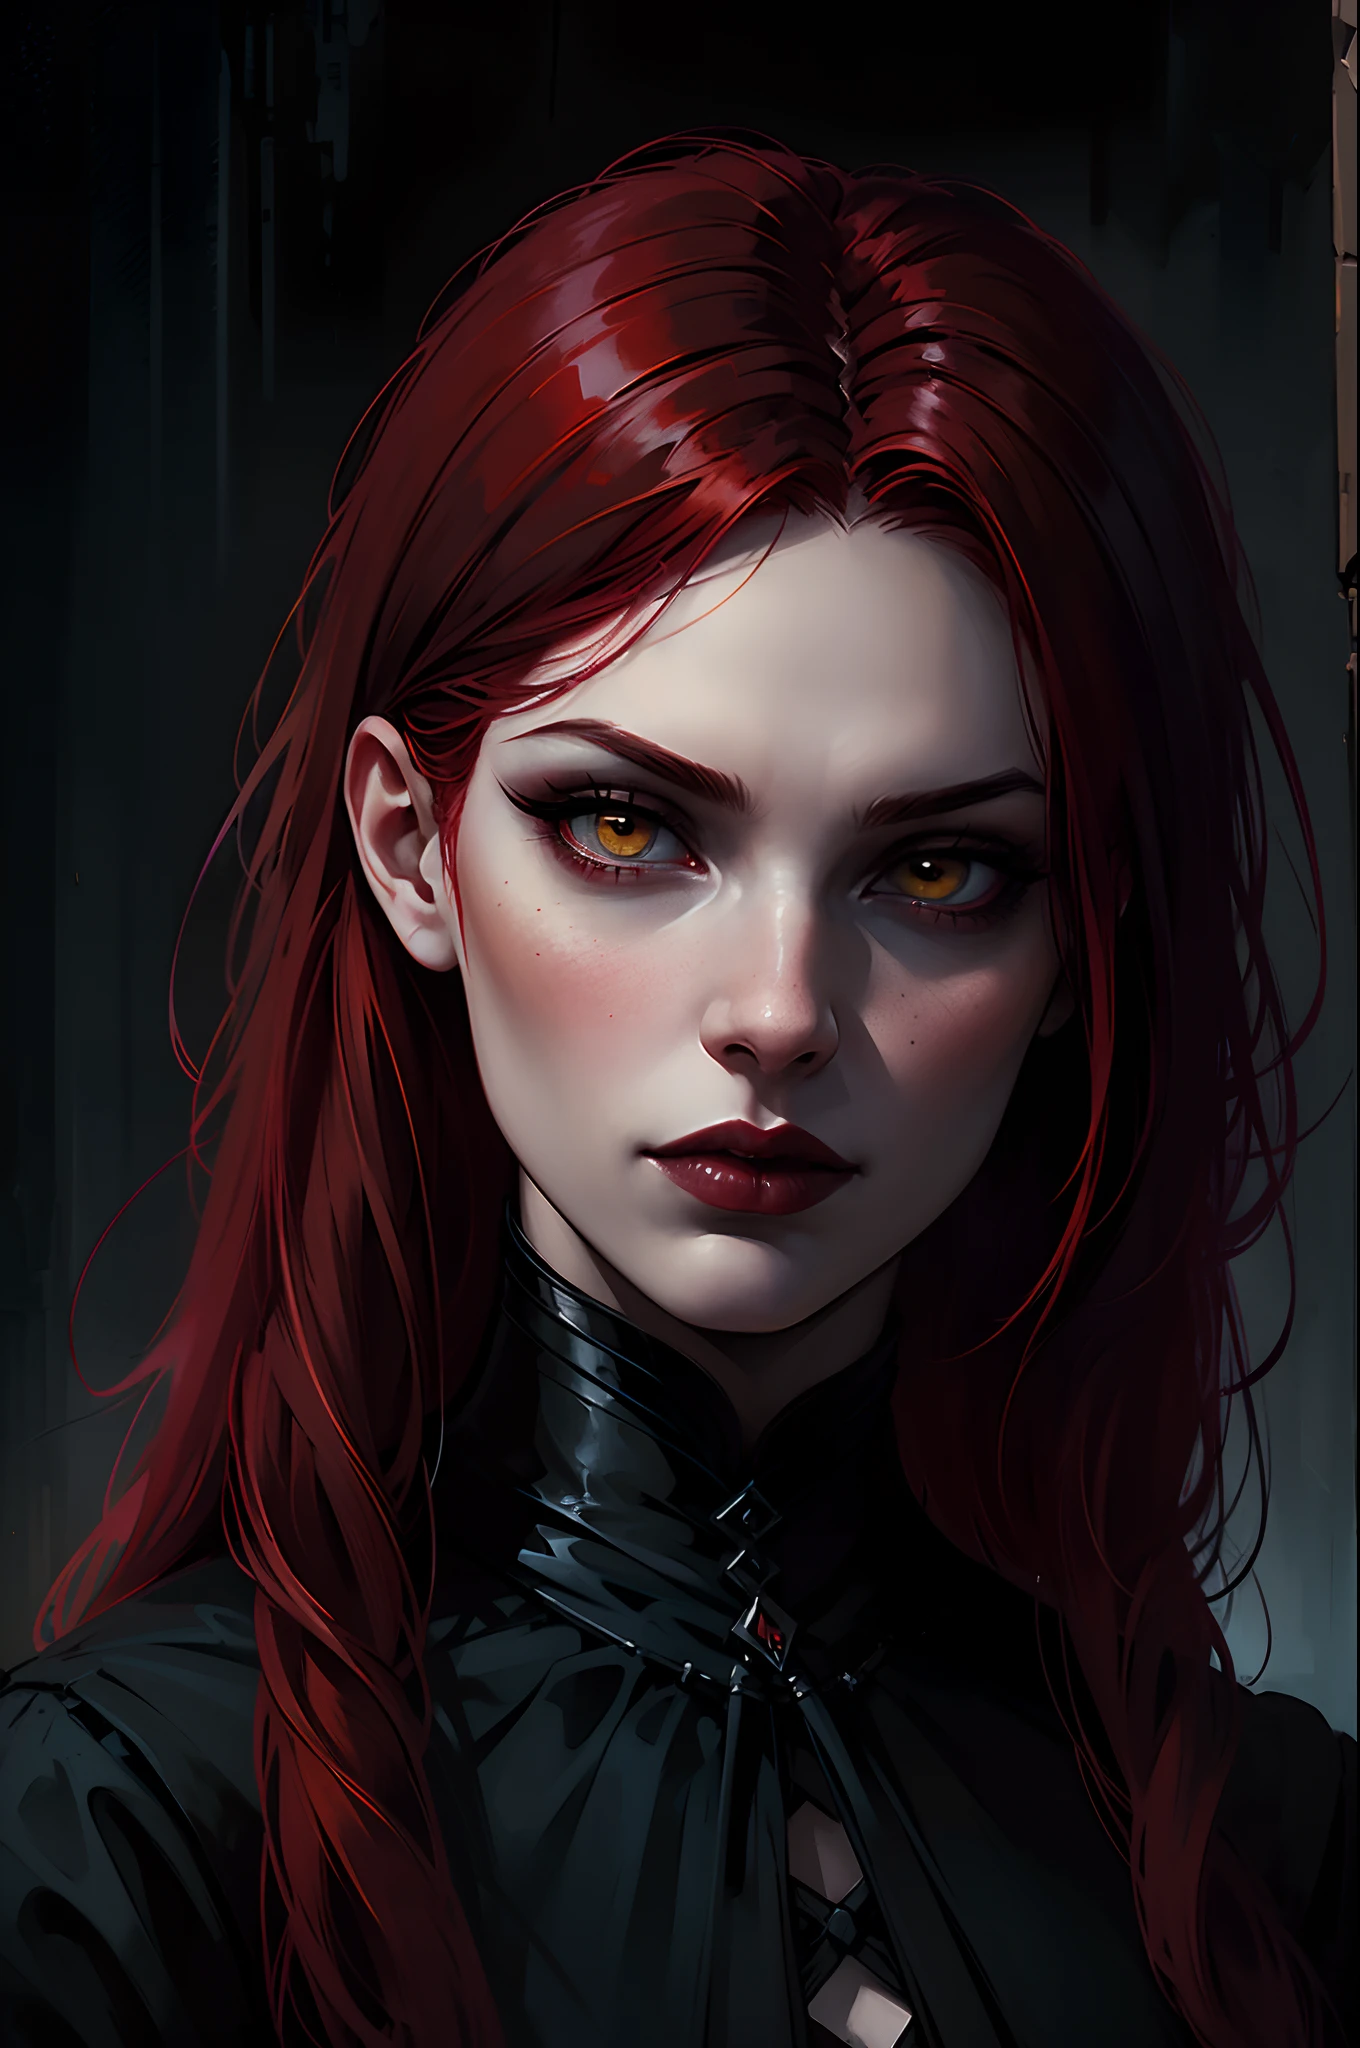 Woman with red hair and yellow eyes in black outfit, Vampire Girl, Dark, But detailed digital art, dark fantasy style art, Portrait of a vampire, androgynous vampire, Dark art style, style of charlie bowater, gothic horror vibes, tom bagshaw artstyle, gothic art style, dark fantasy portrait, neoartcore and charlie bowater